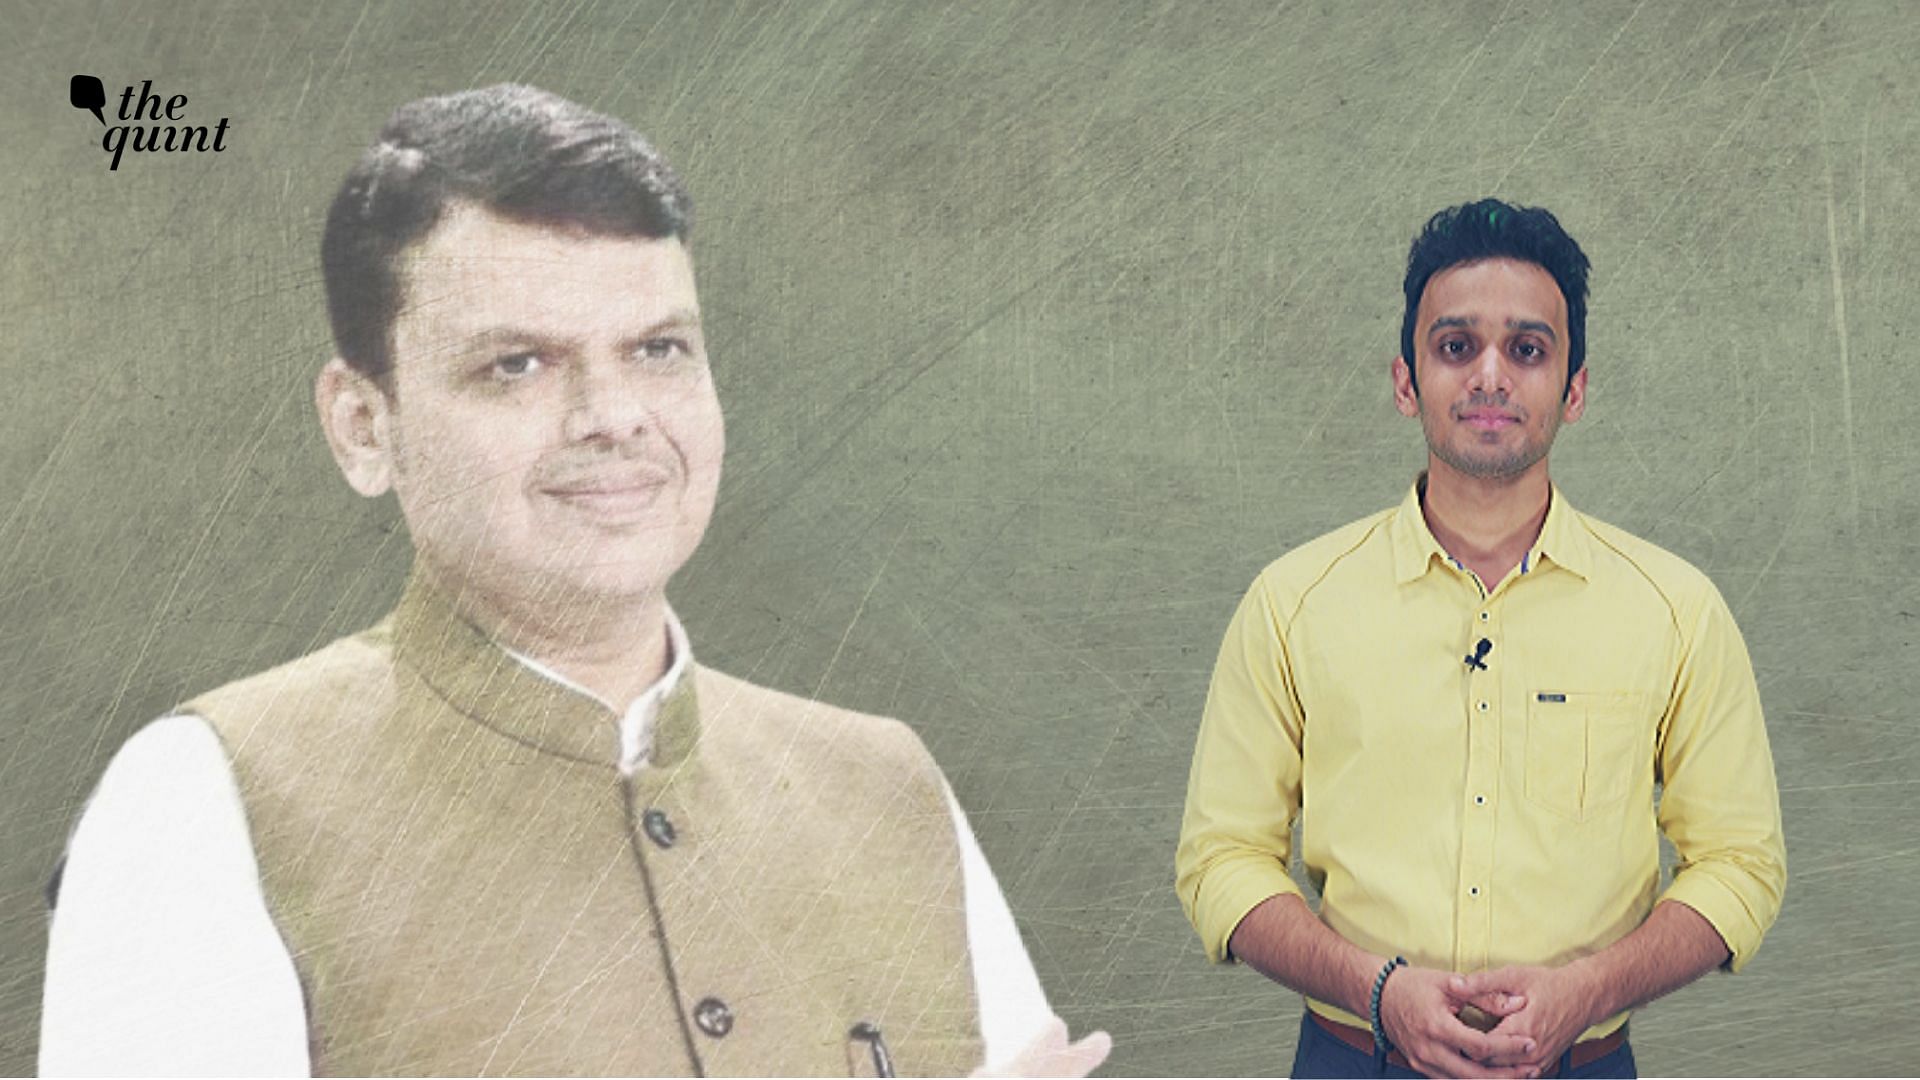 Tackling Sena’s arrogance and being answerable for the BJP’s loss of seats, Fadnavis’ return won’t be a cakewalk.